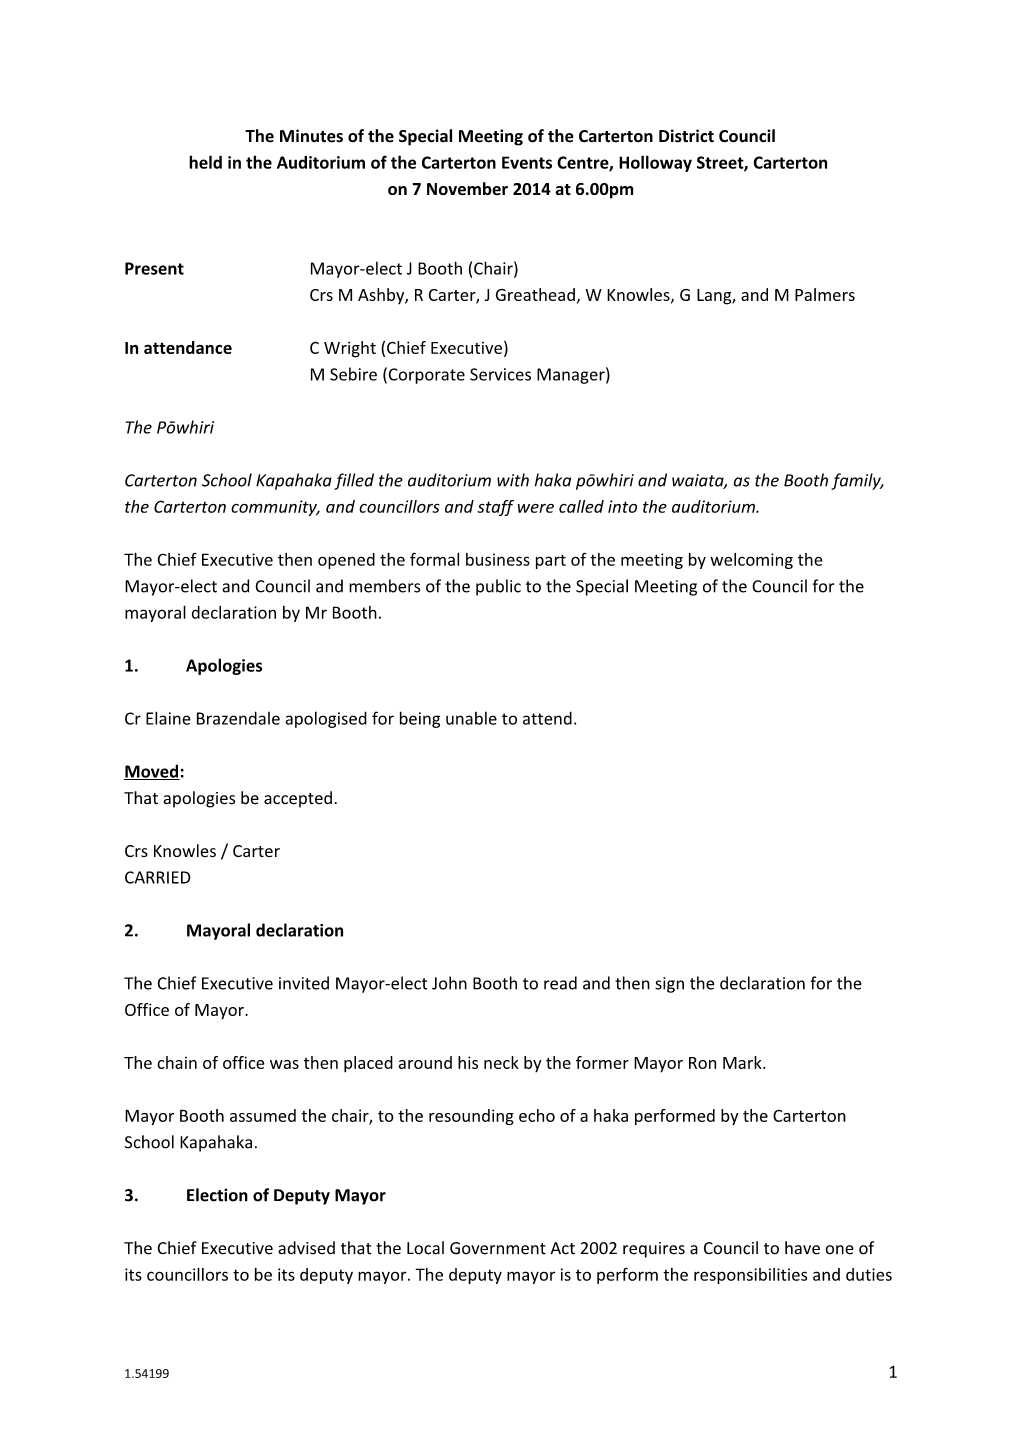 The Minutes of the Special Meeting of the Carterton District Council